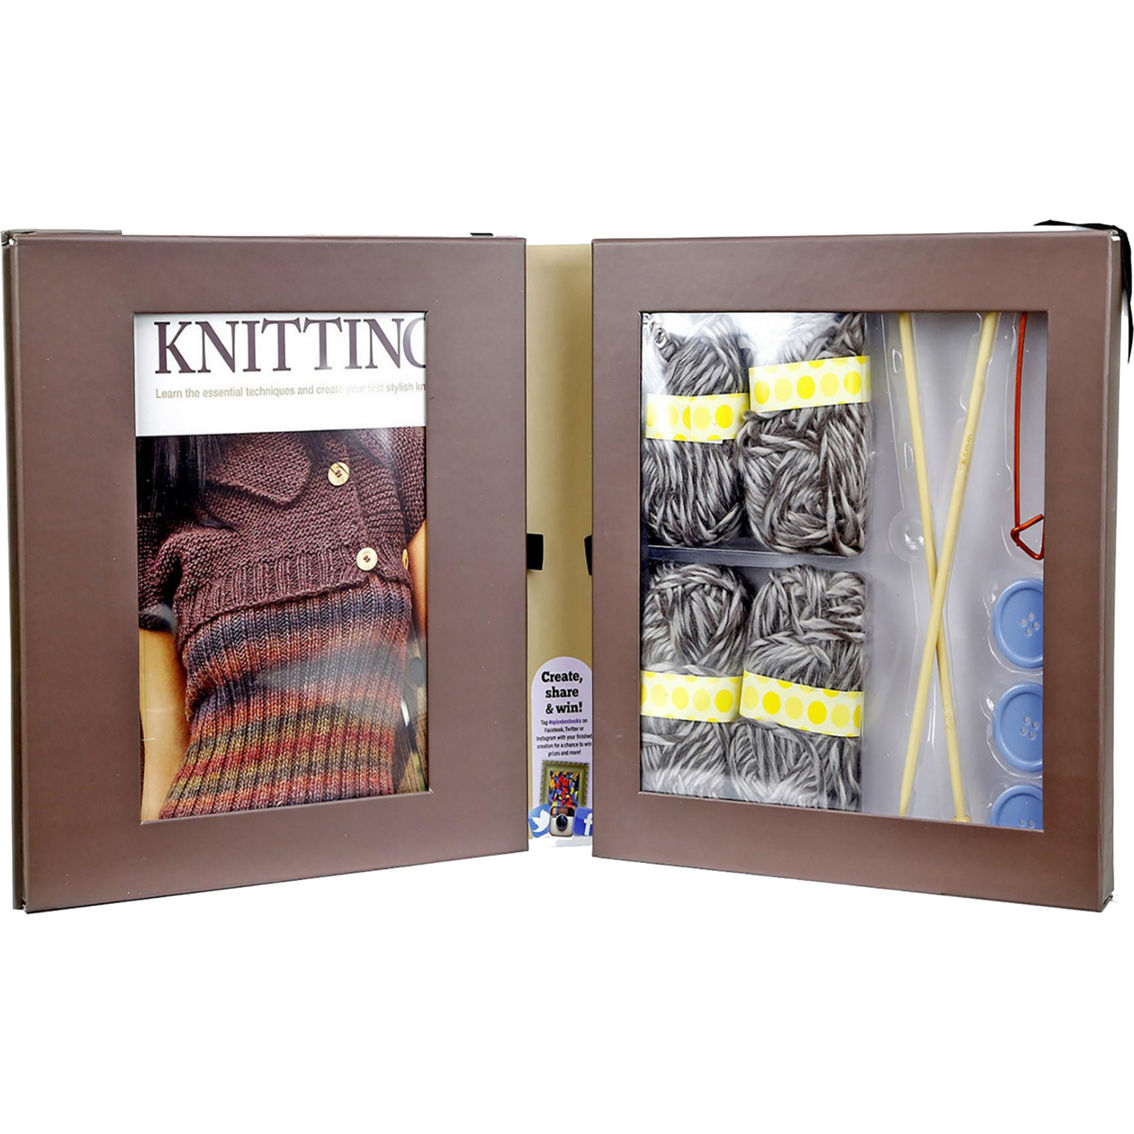 SpiceBox Introduction to Knitting Kit - Image 2 of 3